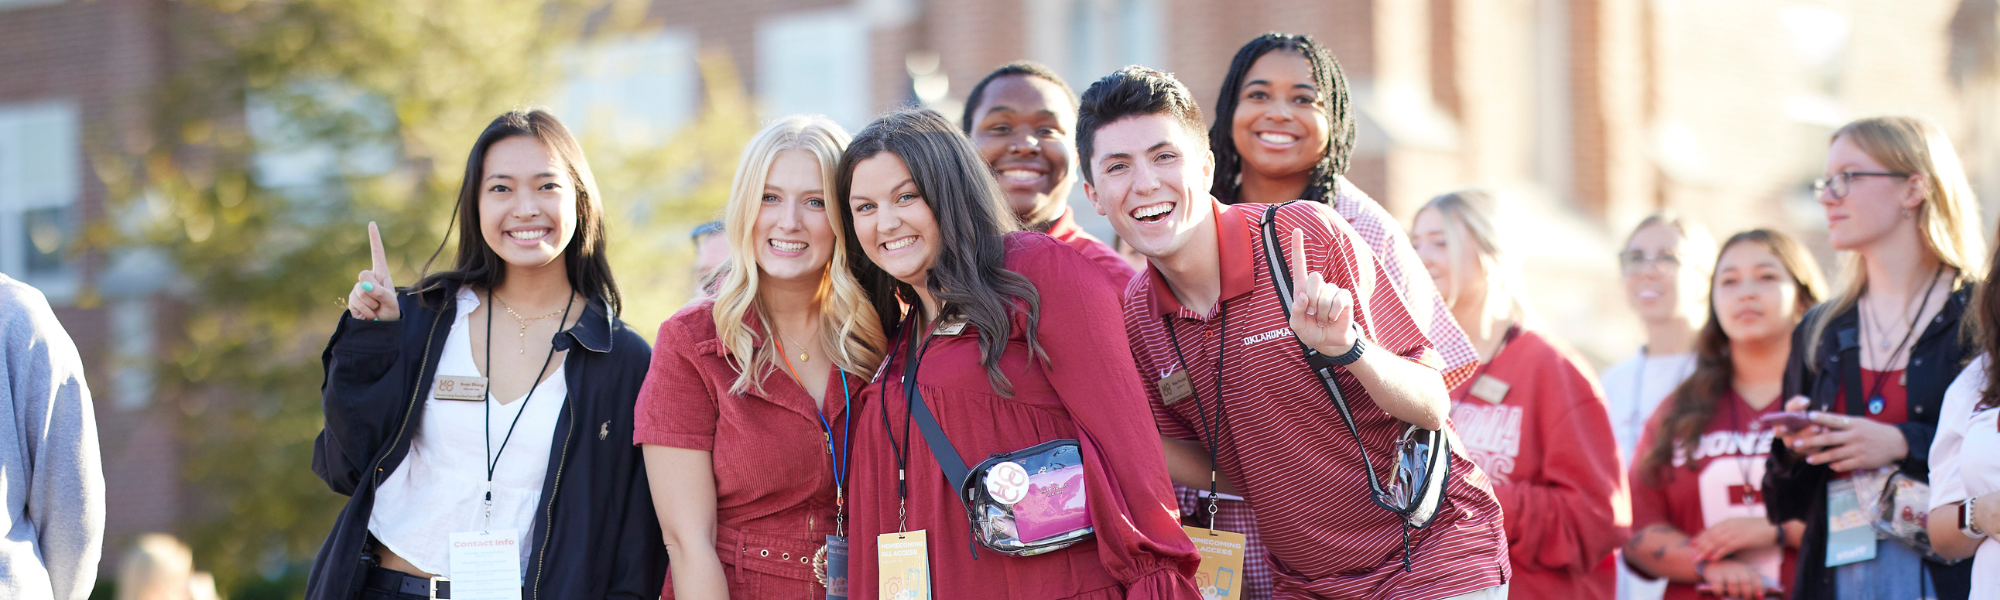 OU Students smiling and holding one finger up during the Homecoming parade.